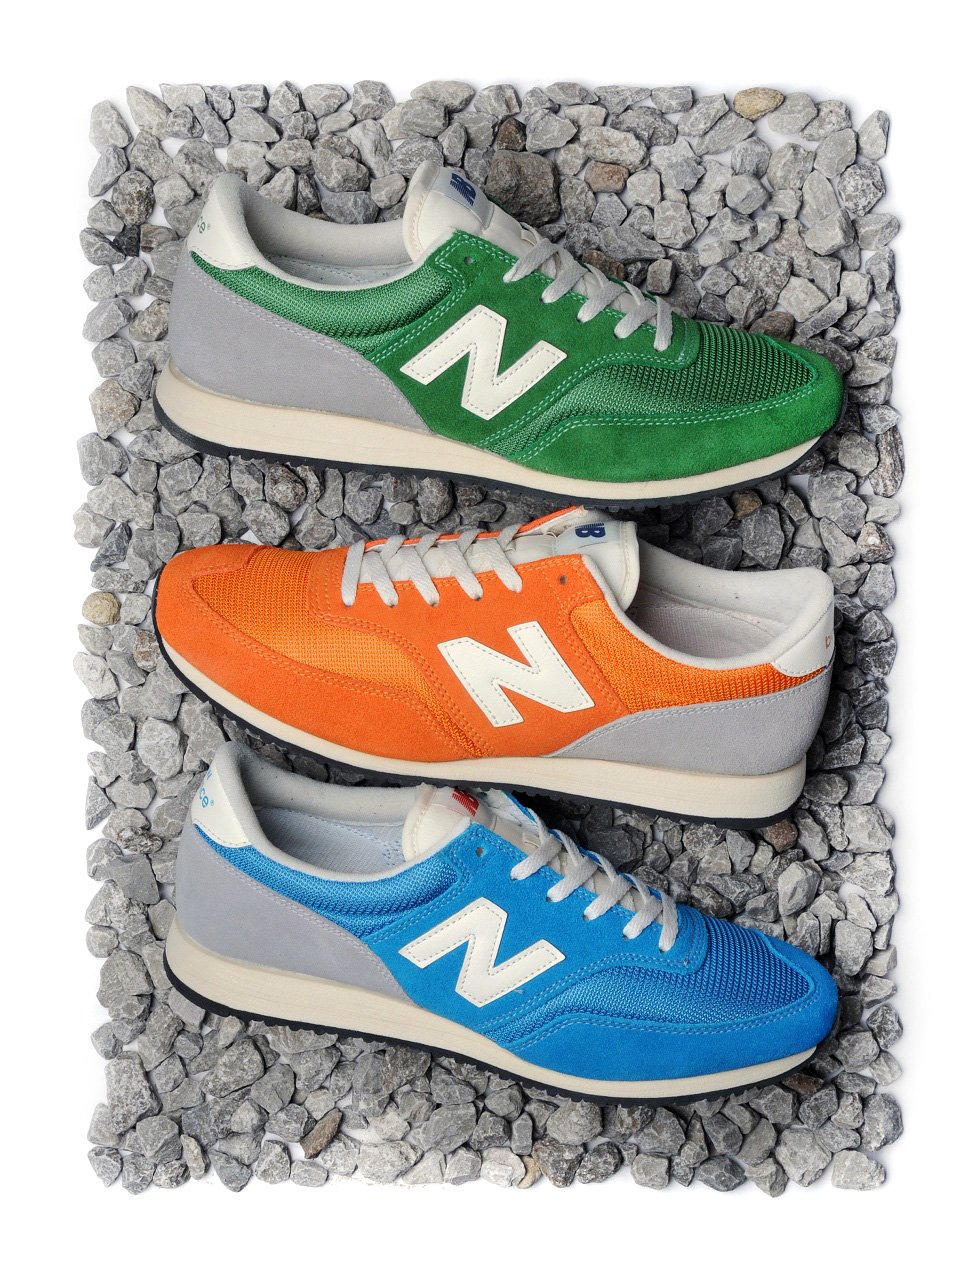 New Balance 620 size? Exclusives